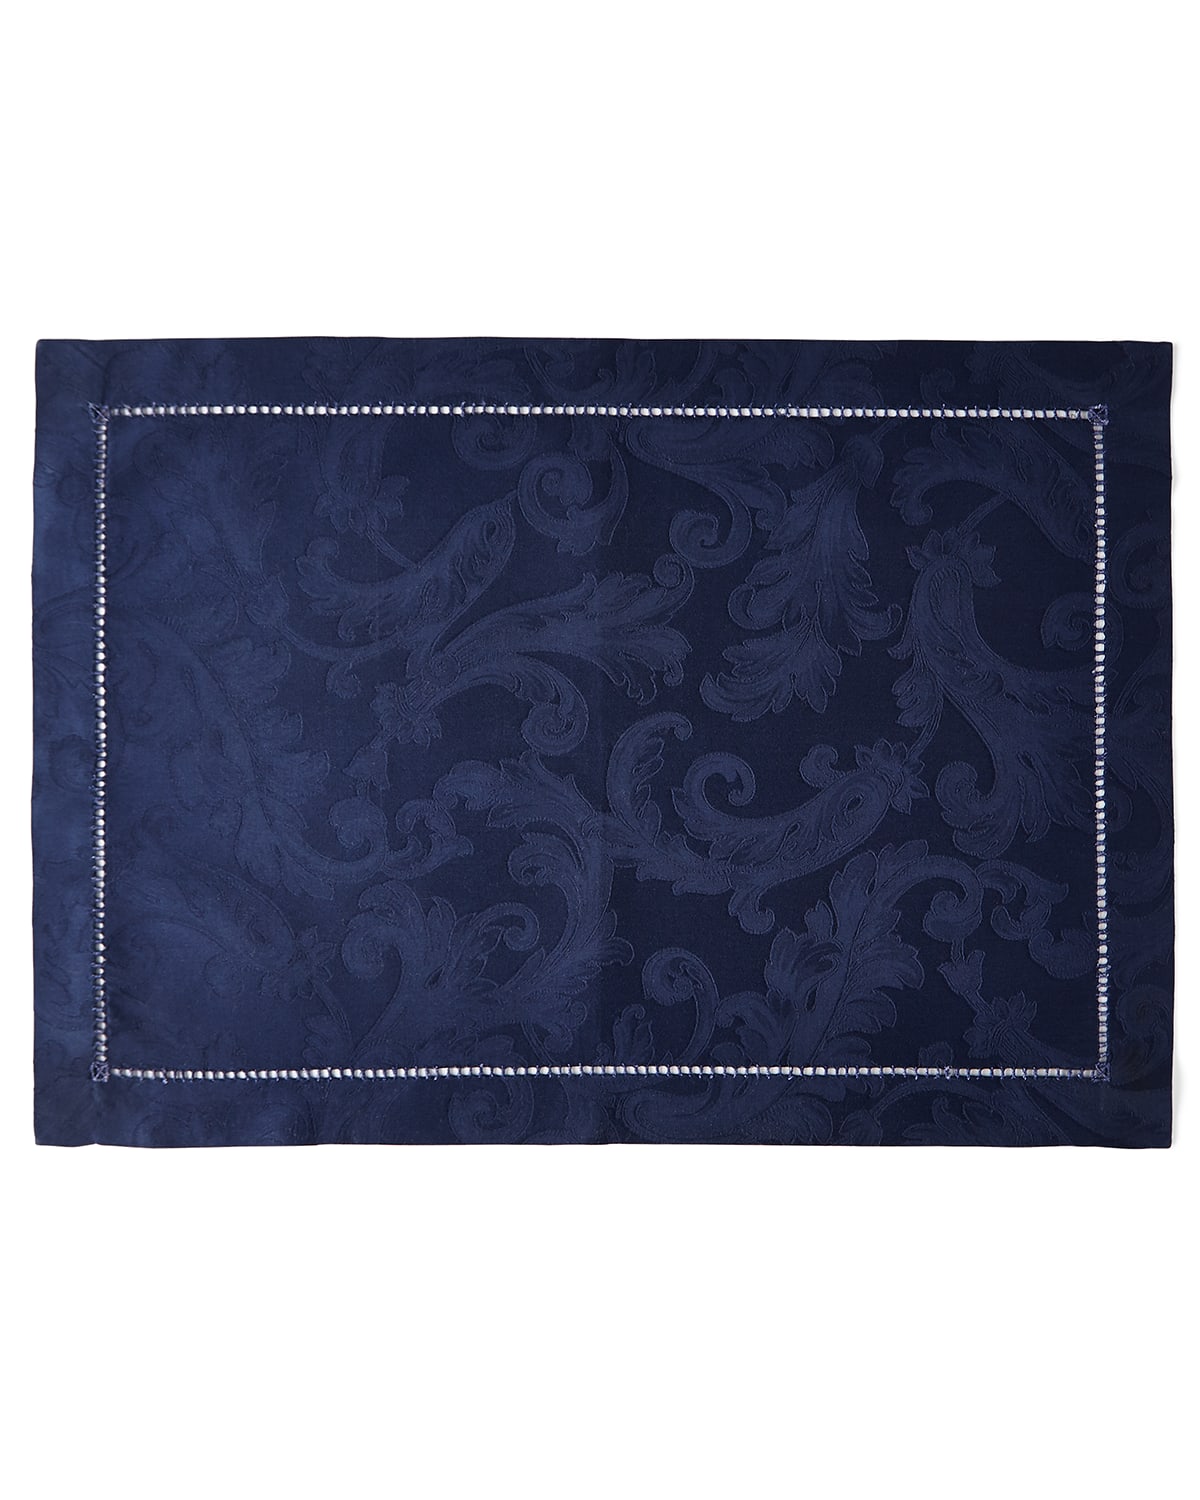 Sferra Plume Jacquard Placemats, Set Of 4 In Sapphire